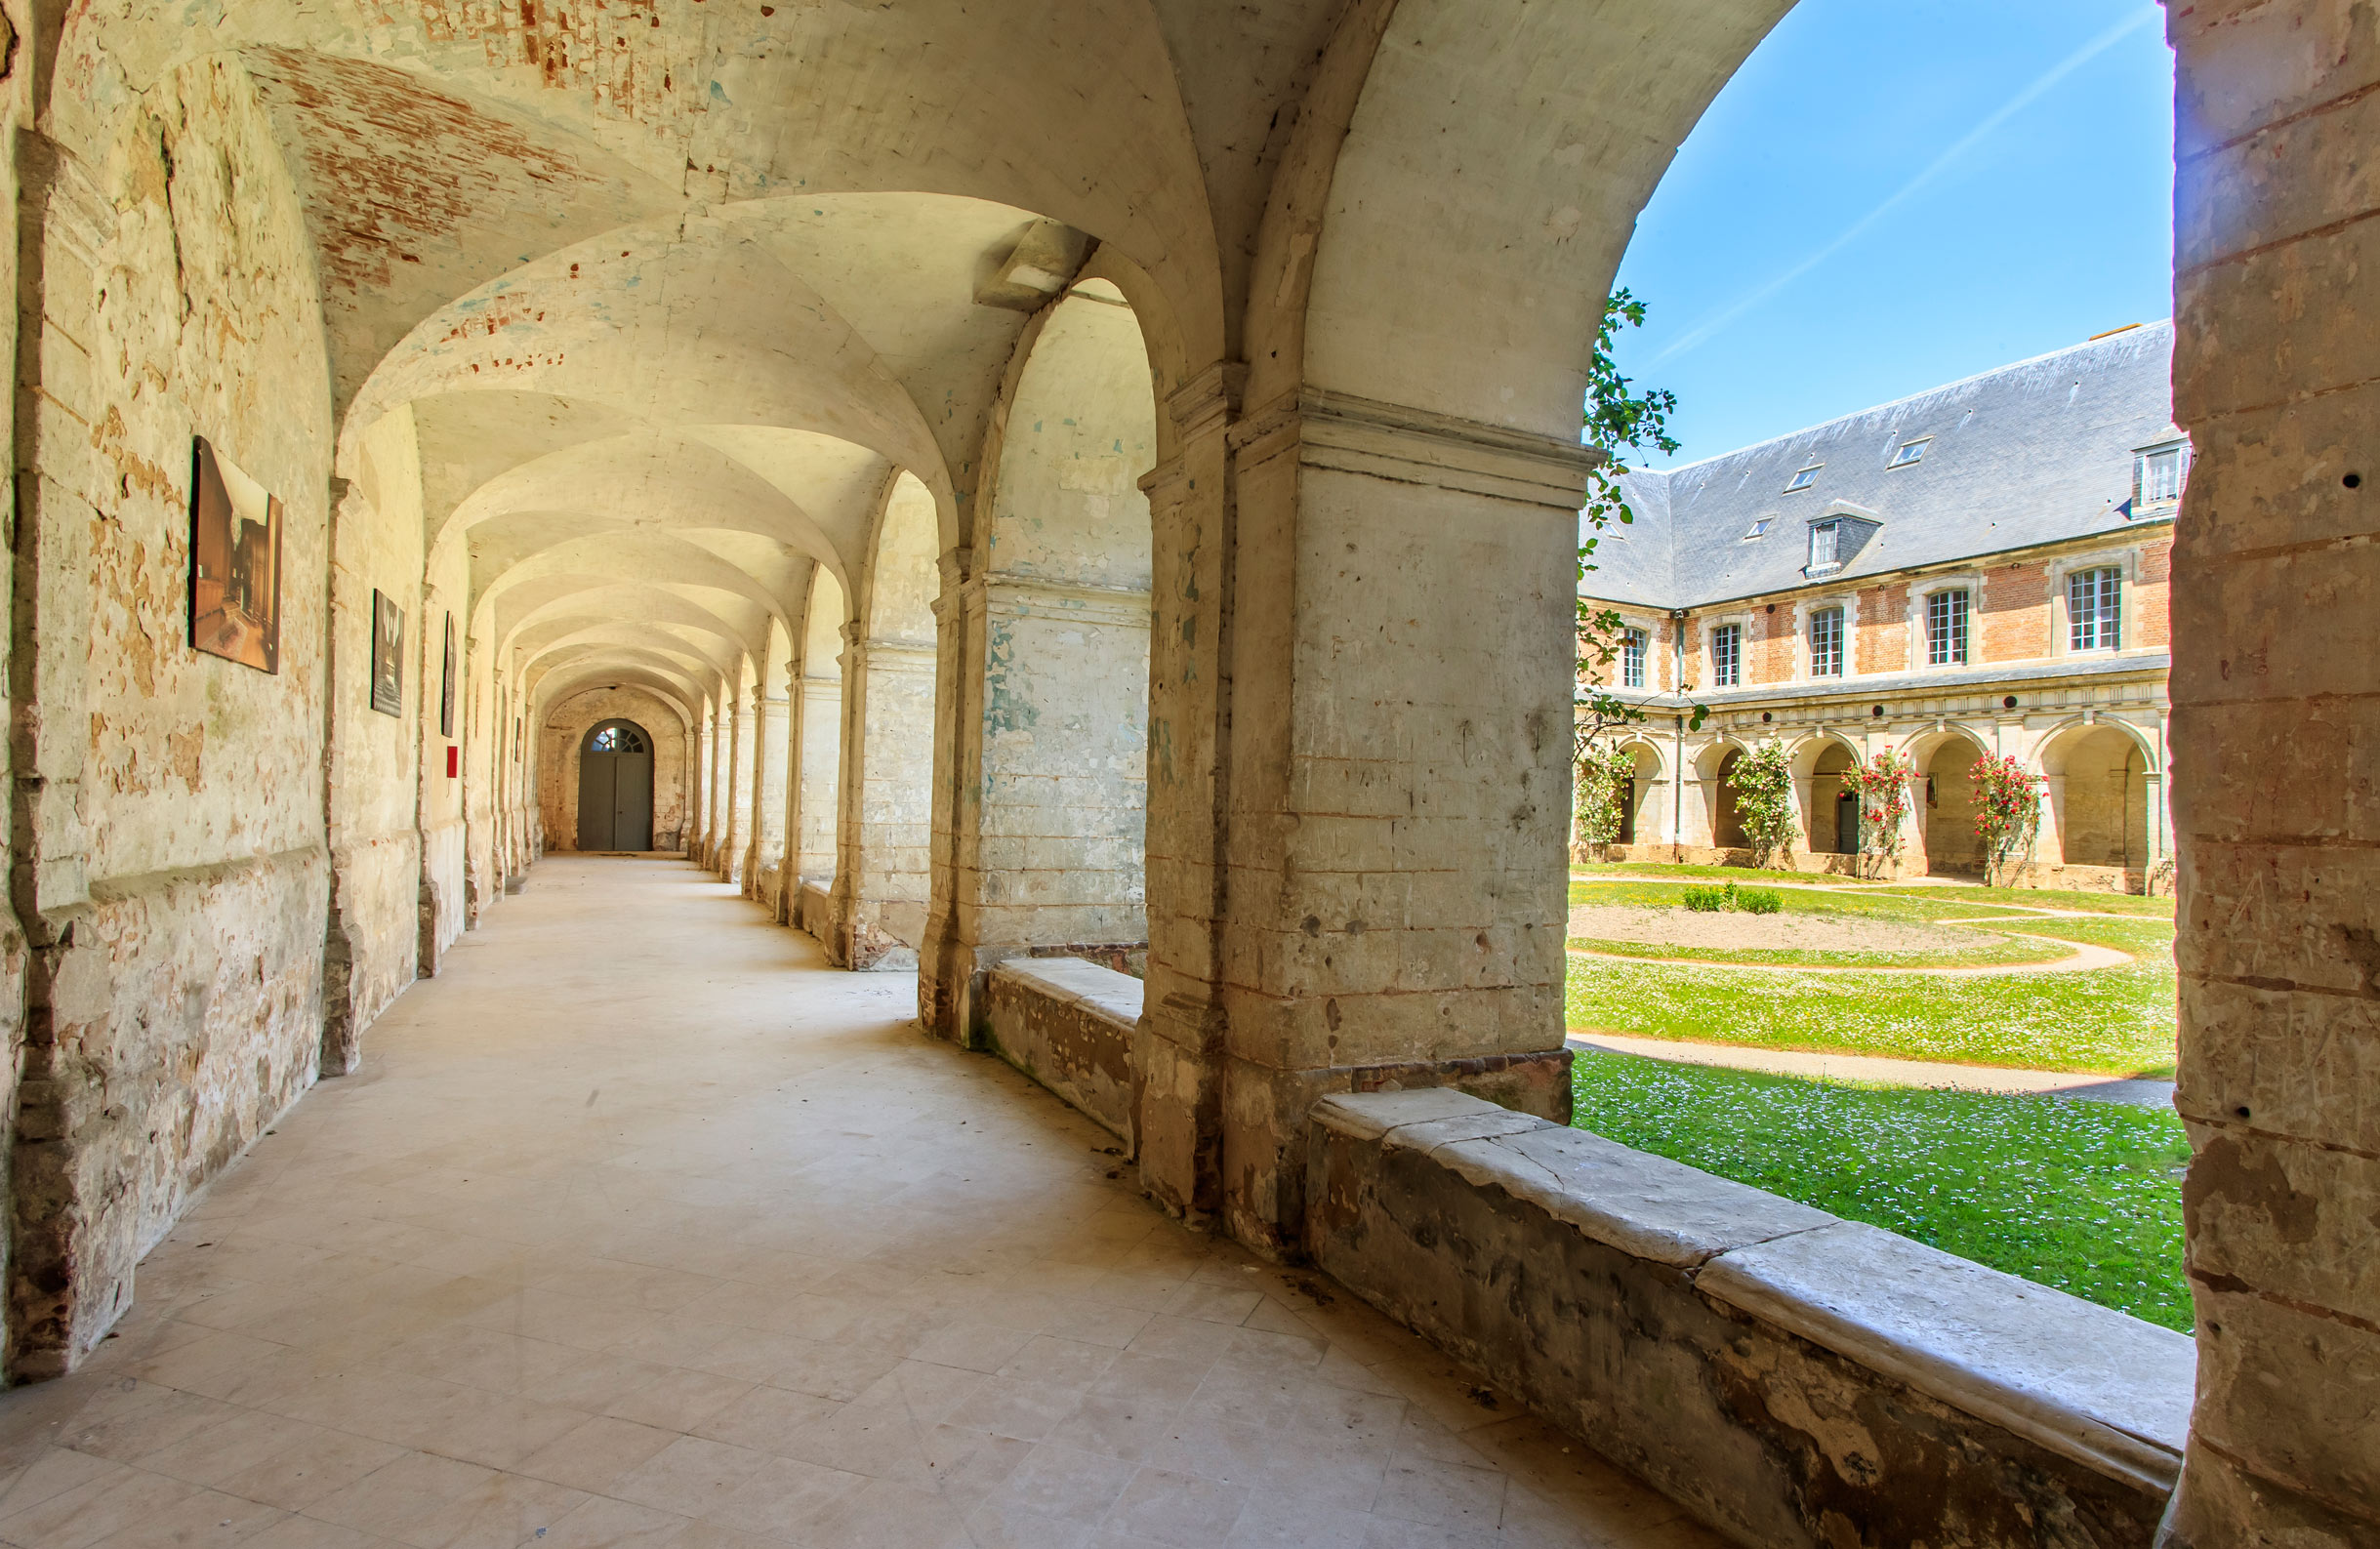 The abbey cloisters at Abbaye-de-Valloires in Argoules, Northern France